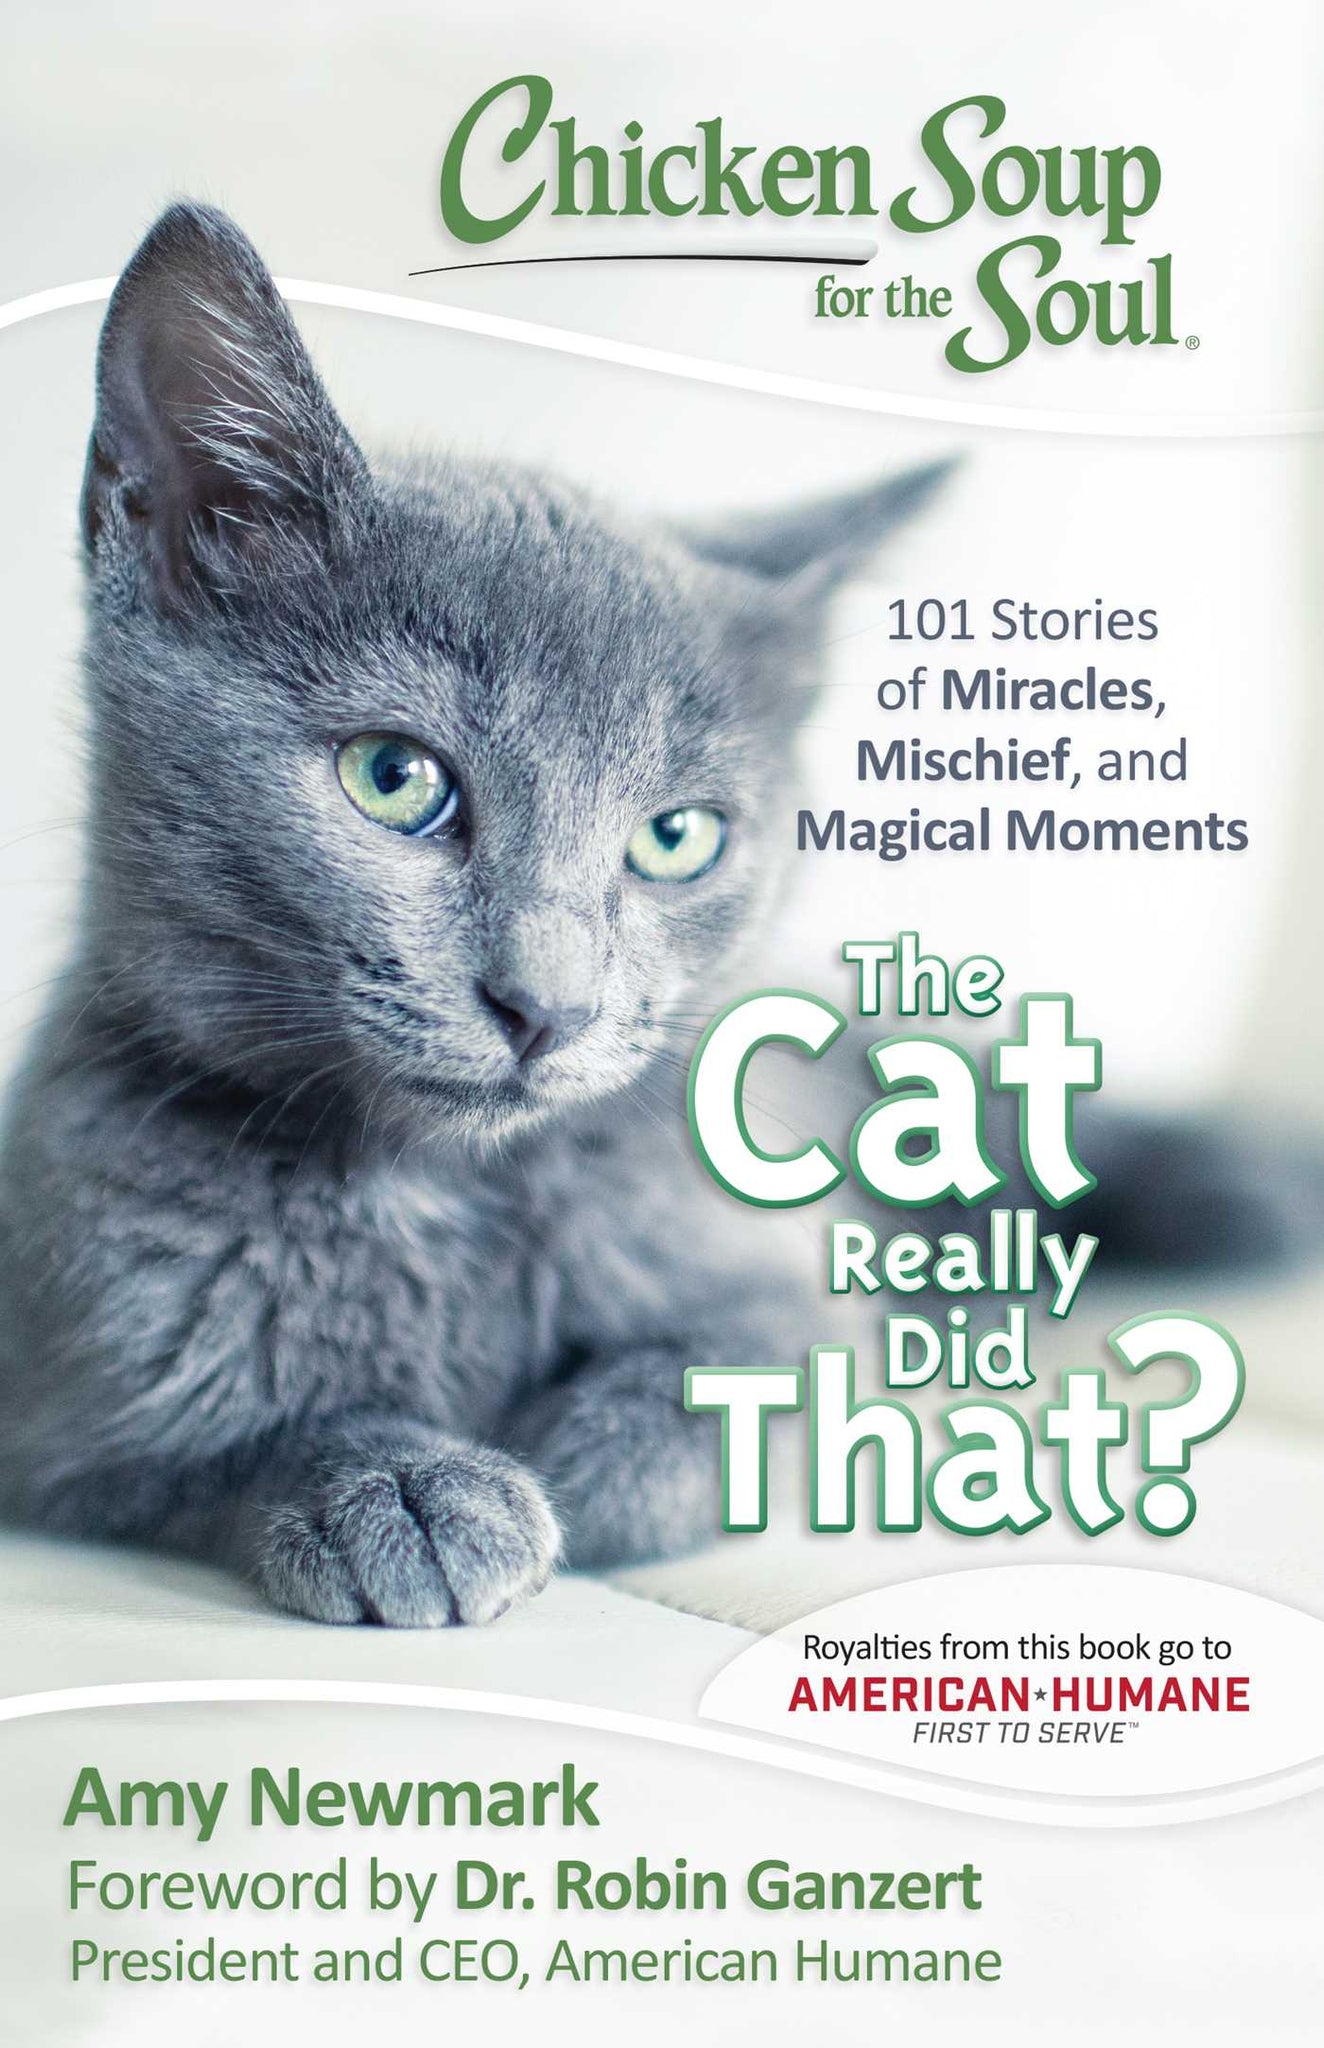 Chicken Soup for the Soul: The Cat Really Did That? : 101 Stories of Miracles, Mischief and Magical Moments